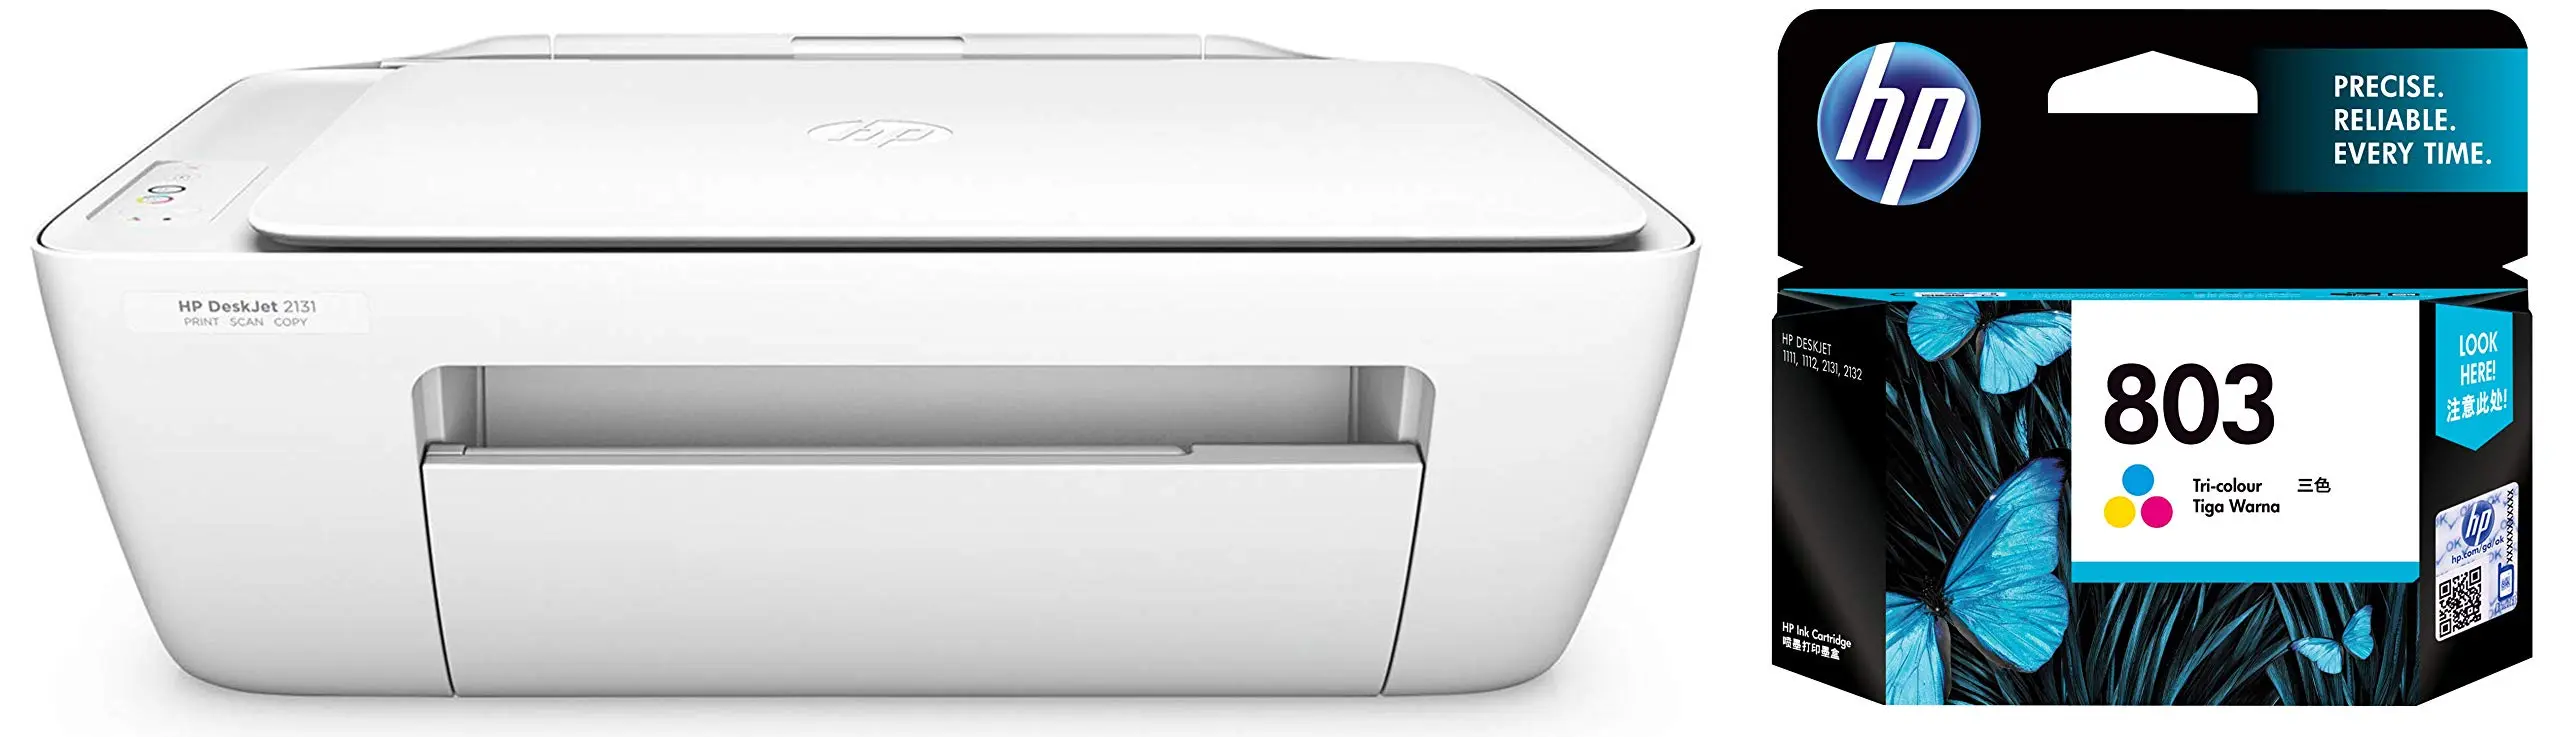 hewlett packard deskjet 2131 all in one printer - What is the cost per page for HP DeskJet 2131